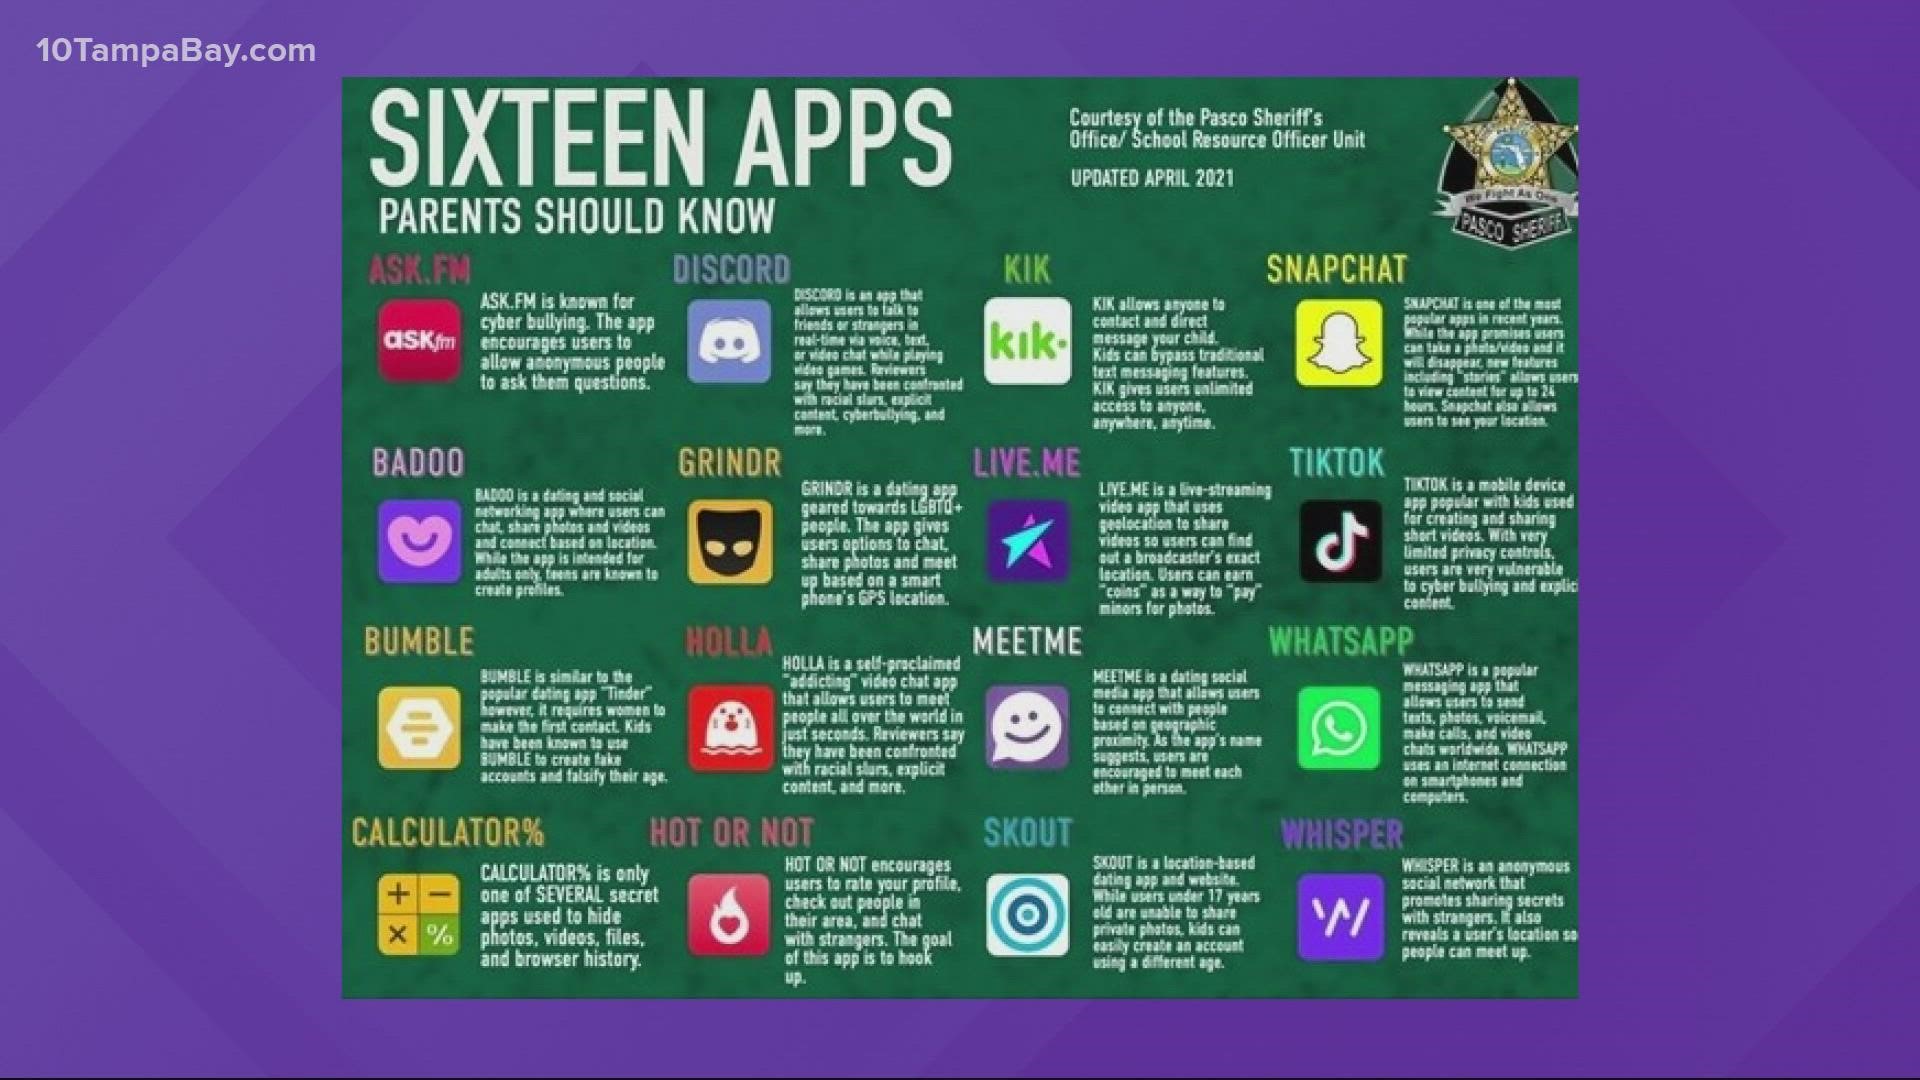 The concern for many of the apps on the list is centered around the potential for cyberbullying and explicit content.